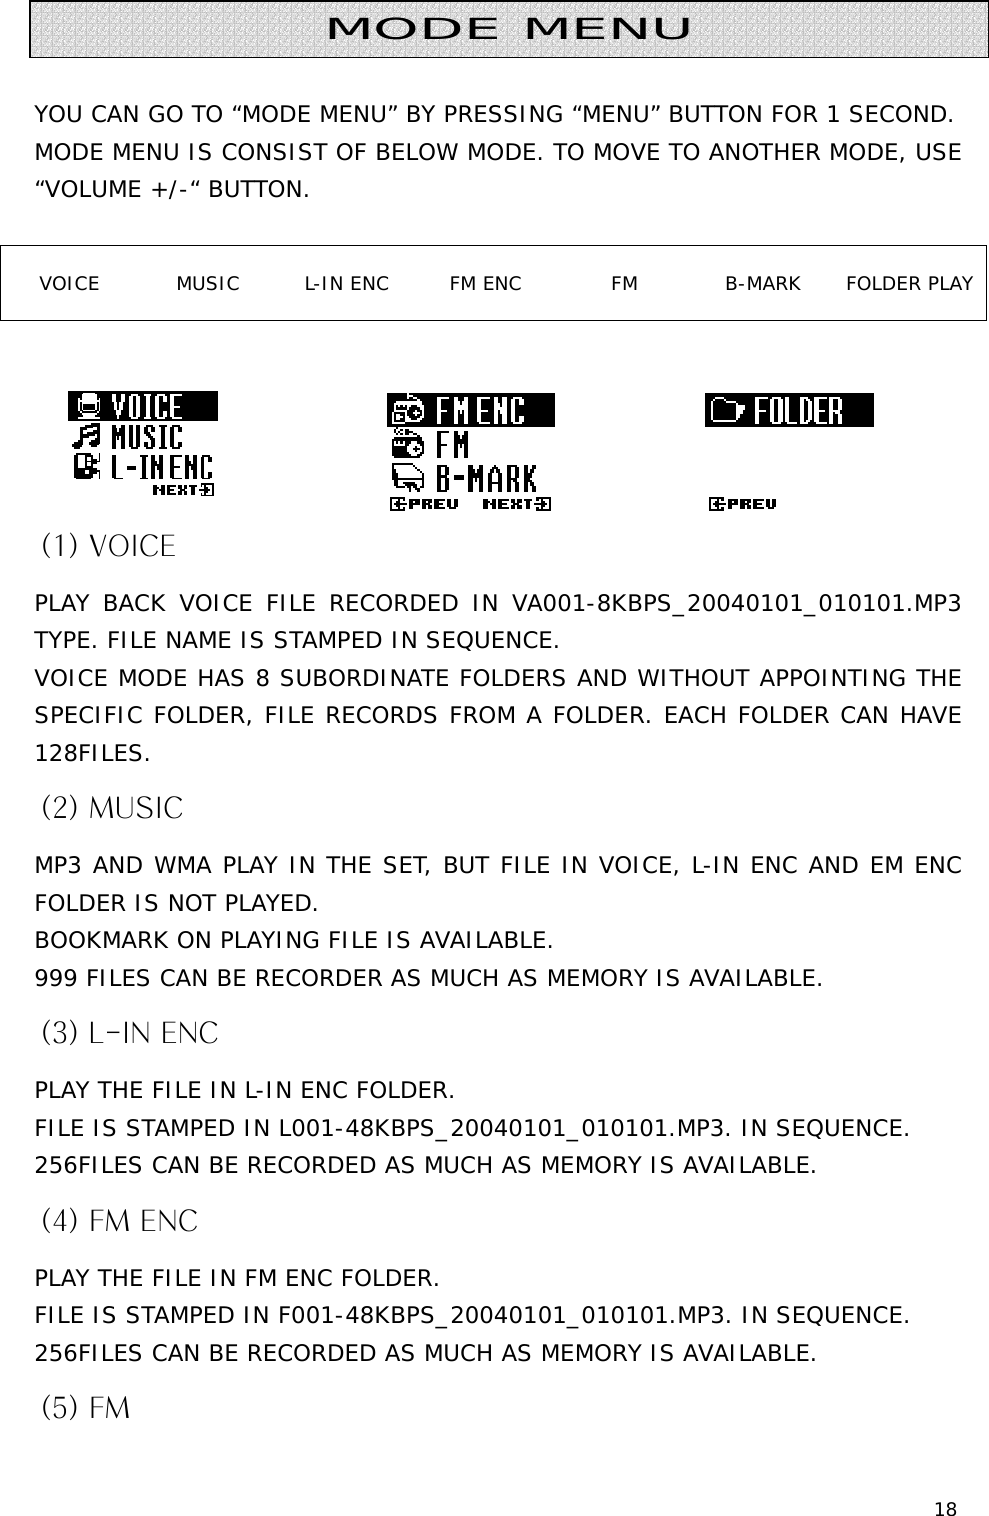 18   YOU CAN GO TO “MODE MENU” BY PRESSING “MENU” BUTTON FOR 1 SECOND. MODE MENU IS CONSIST OF BELOW MODE. TO MOVE TO ANOTHER MODE, USE “VOLUME +/-“ BUTTON.  VOICE  MUSIC  L-IN ENC  FM ENC  FM  B-MARK  FOLDER PLAY      (1) VOICE PLAY BACK VOICE FILE RECORDED IN VA001-8KBPS_20040101_010101.MP3 TYPE. FILE NAME IS STAMPED IN SEQUENCE. VOICE MODE HAS 8 SUBORDINATE FOLDERS AND WITHOUT APPOINTING THE SPECIFIC FOLDER, FILE RECORDS FROM A FOLDER. EACH FOLDER CAN HAVE 128FILES. (2) MUSIC MP3 AND WMA PLAY IN THE SET, BUT FILE IN VOICE, L-IN ENC AND EM ENC FOLDER IS NOT PLAYED. BOOKMARK ON PLAYING FILE IS AVAILABLE. 999 FILES CAN BE RECORDER AS MUCH AS MEMORY IS AVAILABLE. (3) L-IN ENC PLAY THE FILE IN L-IN ENC FOLDER. FILE IS STAMPED IN L001-48KBPS_20040101_010101.MP3. IN SEQUENCE. 256FILES CAN BE RECORDED AS MUCH AS MEMORY IS AVAILABLE. (4) FM ENC PLAY THE FILE IN FM ENC FOLDER. FILE IS STAMPED IN F001-48KBPS_20040101_010101.MP3. IN SEQUENCE. 256FILES CAN BE RECORDED AS MUCH AS MEMORY IS AVAILABLE. (5) FM   MODE MENU 